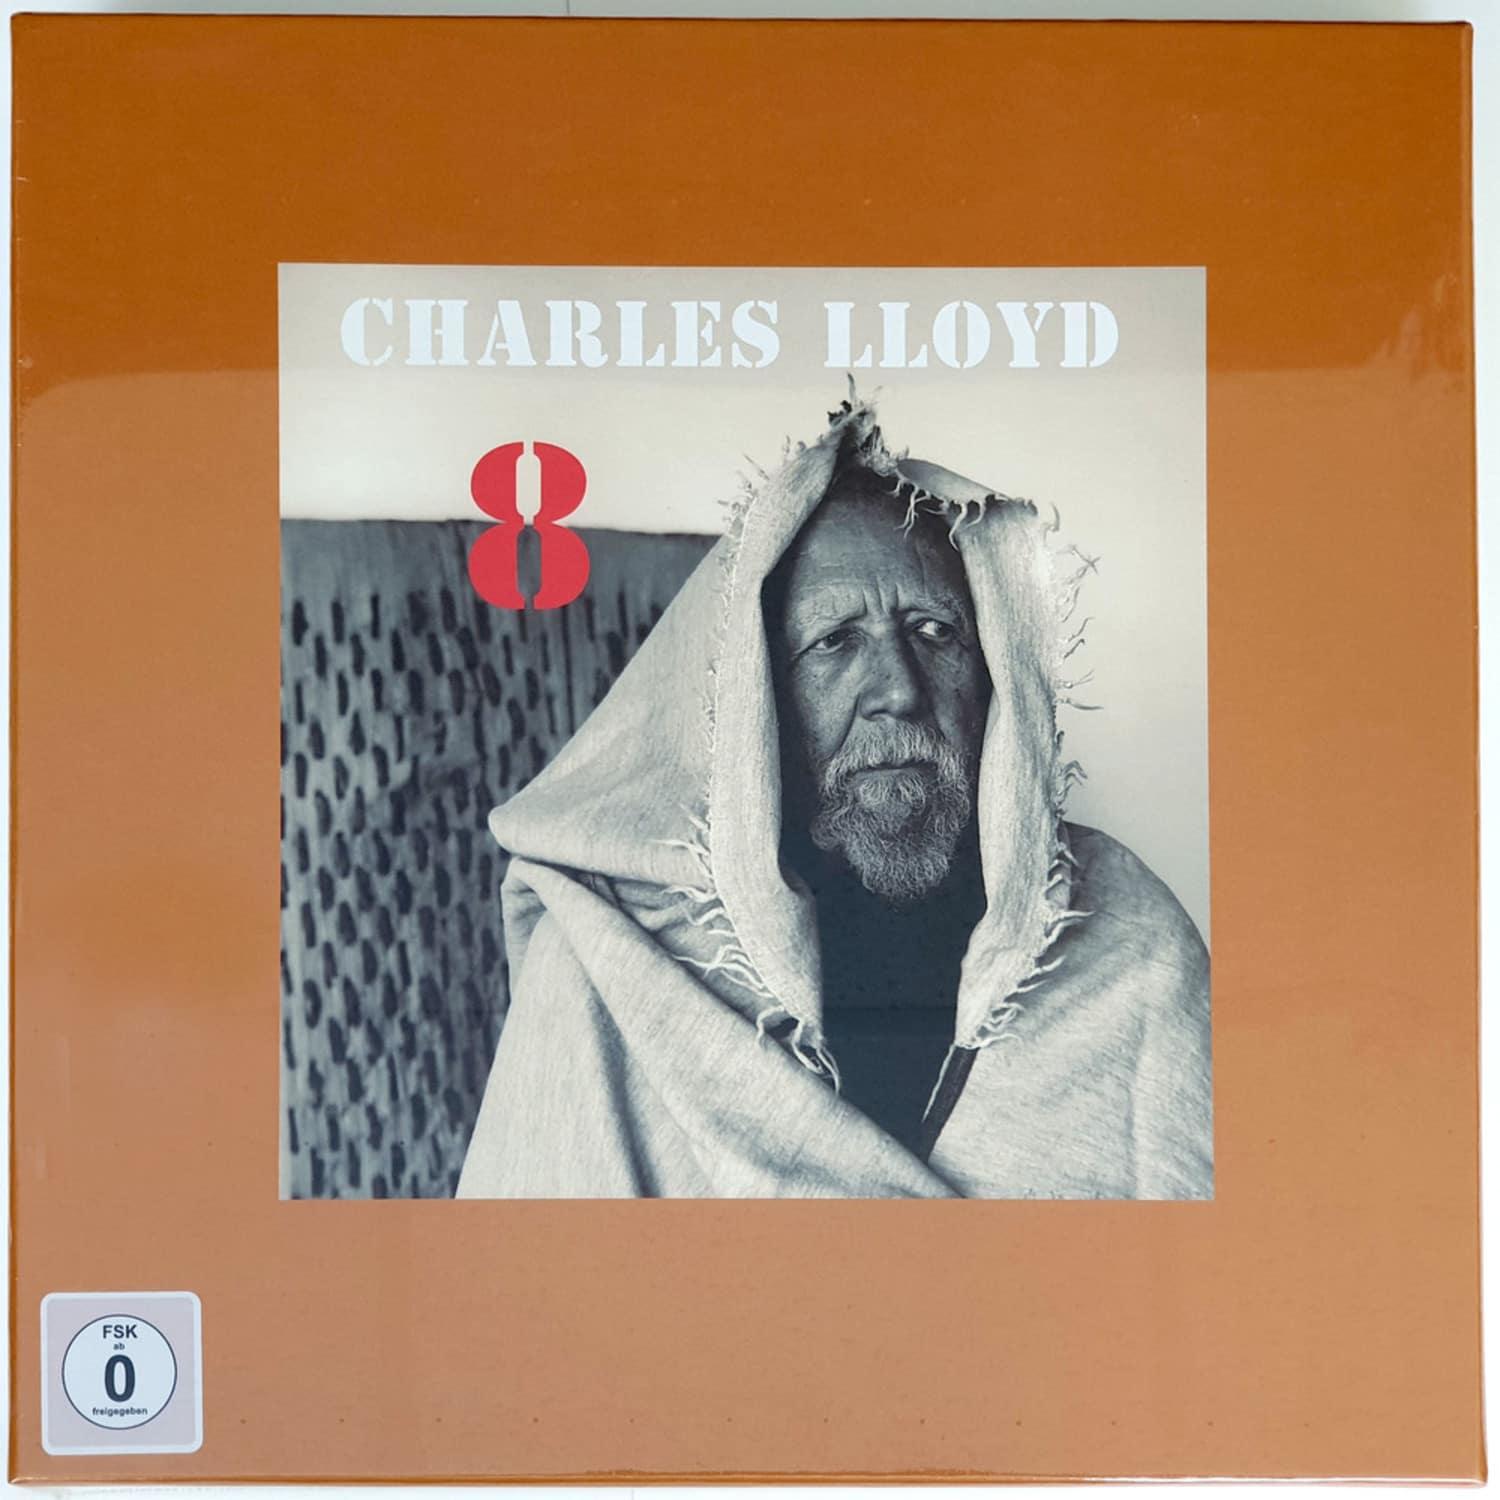 Charles Lloyd - 8: KINDRED SPIRITS - LIVE FROM LOBERO THEATER 